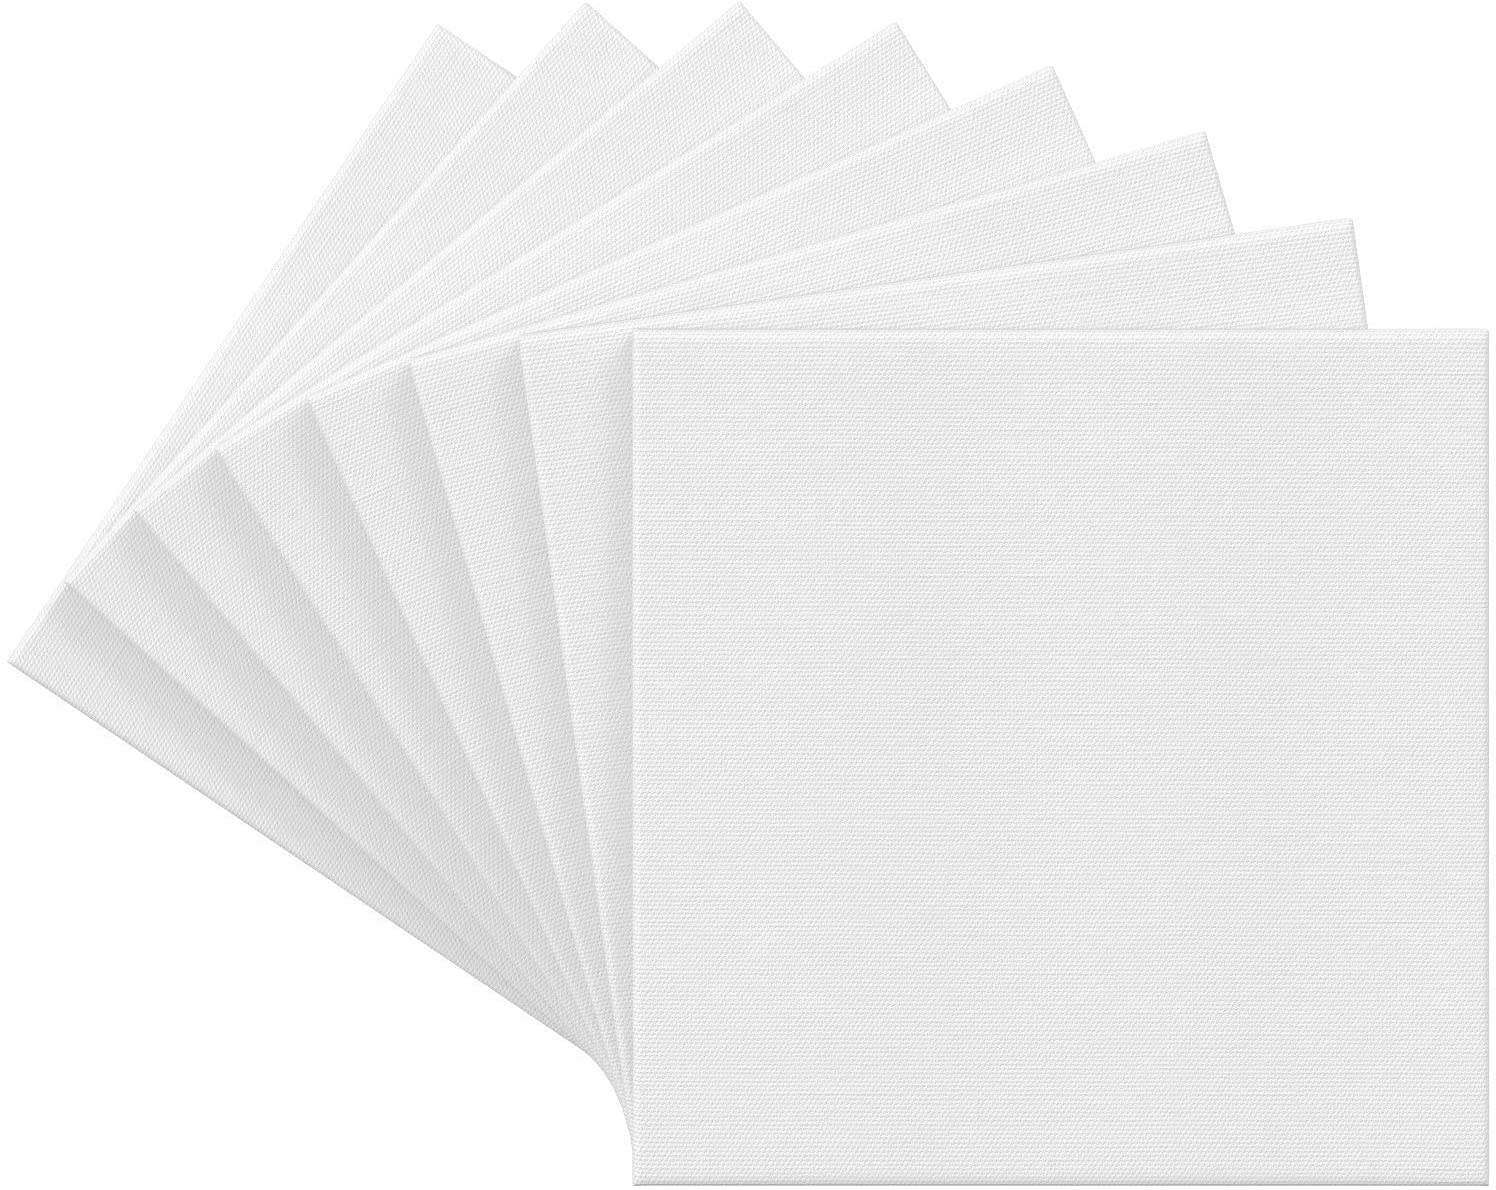 Arteza Stretched Canvas, Premium, White, 18x24, Large Blank Canvas Boards  for Painting - 4 Pack